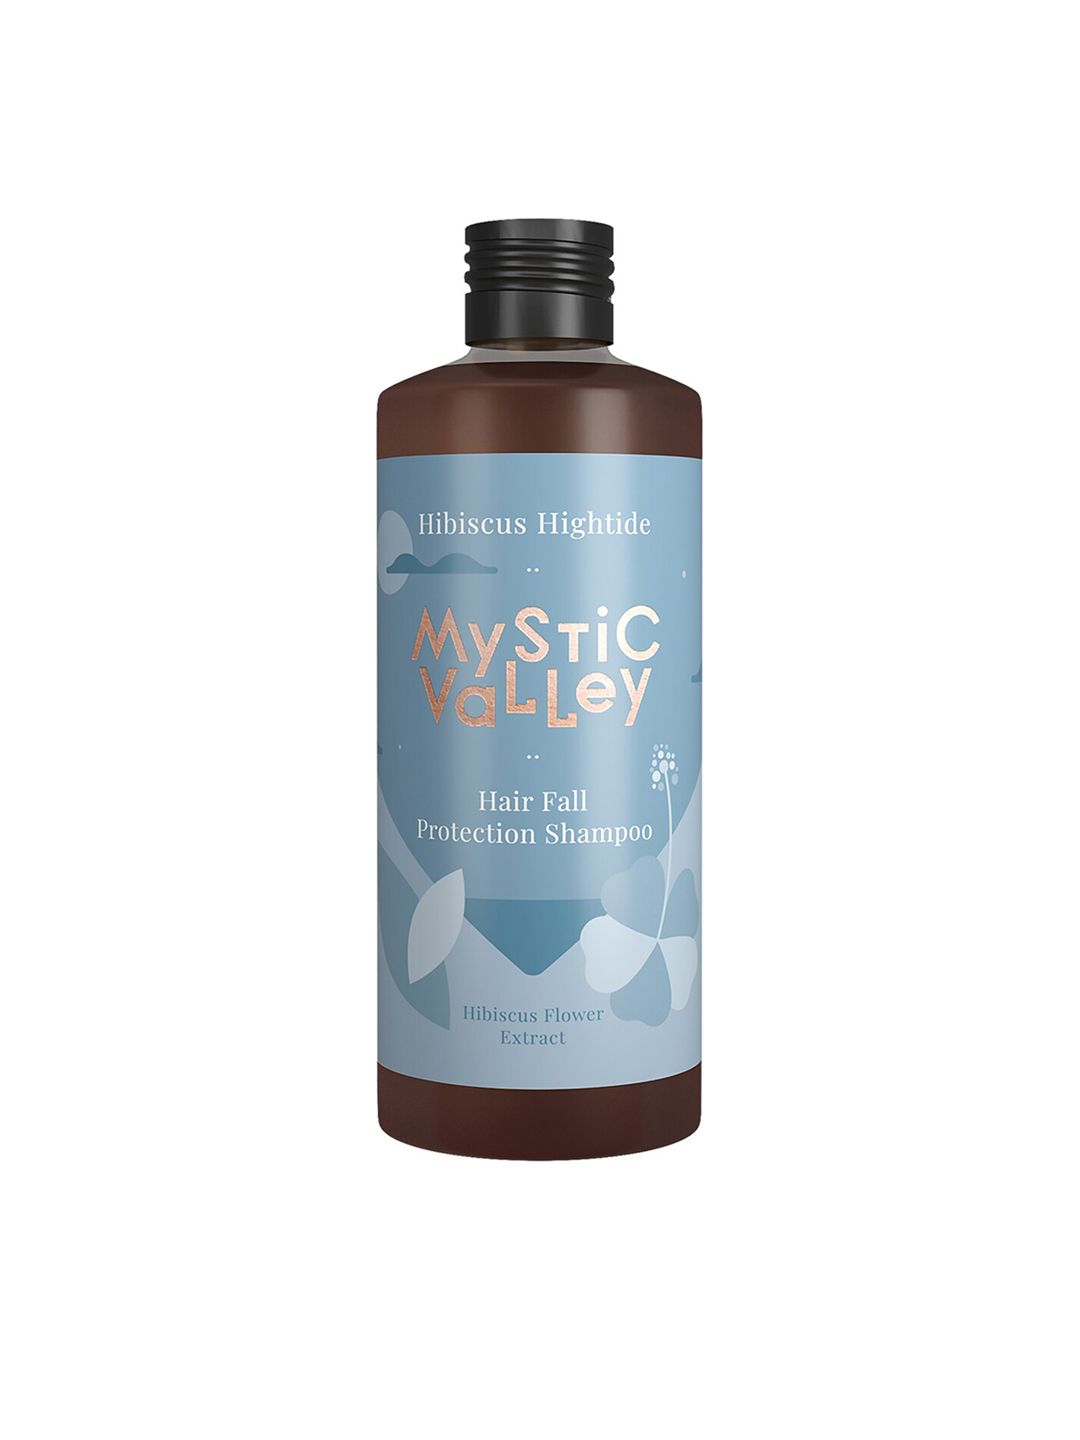 MYSTIC VALLEY Hibiscus Hightide Hair Fall Protection Shampoo with Aloe Vera 350 ml Price in India